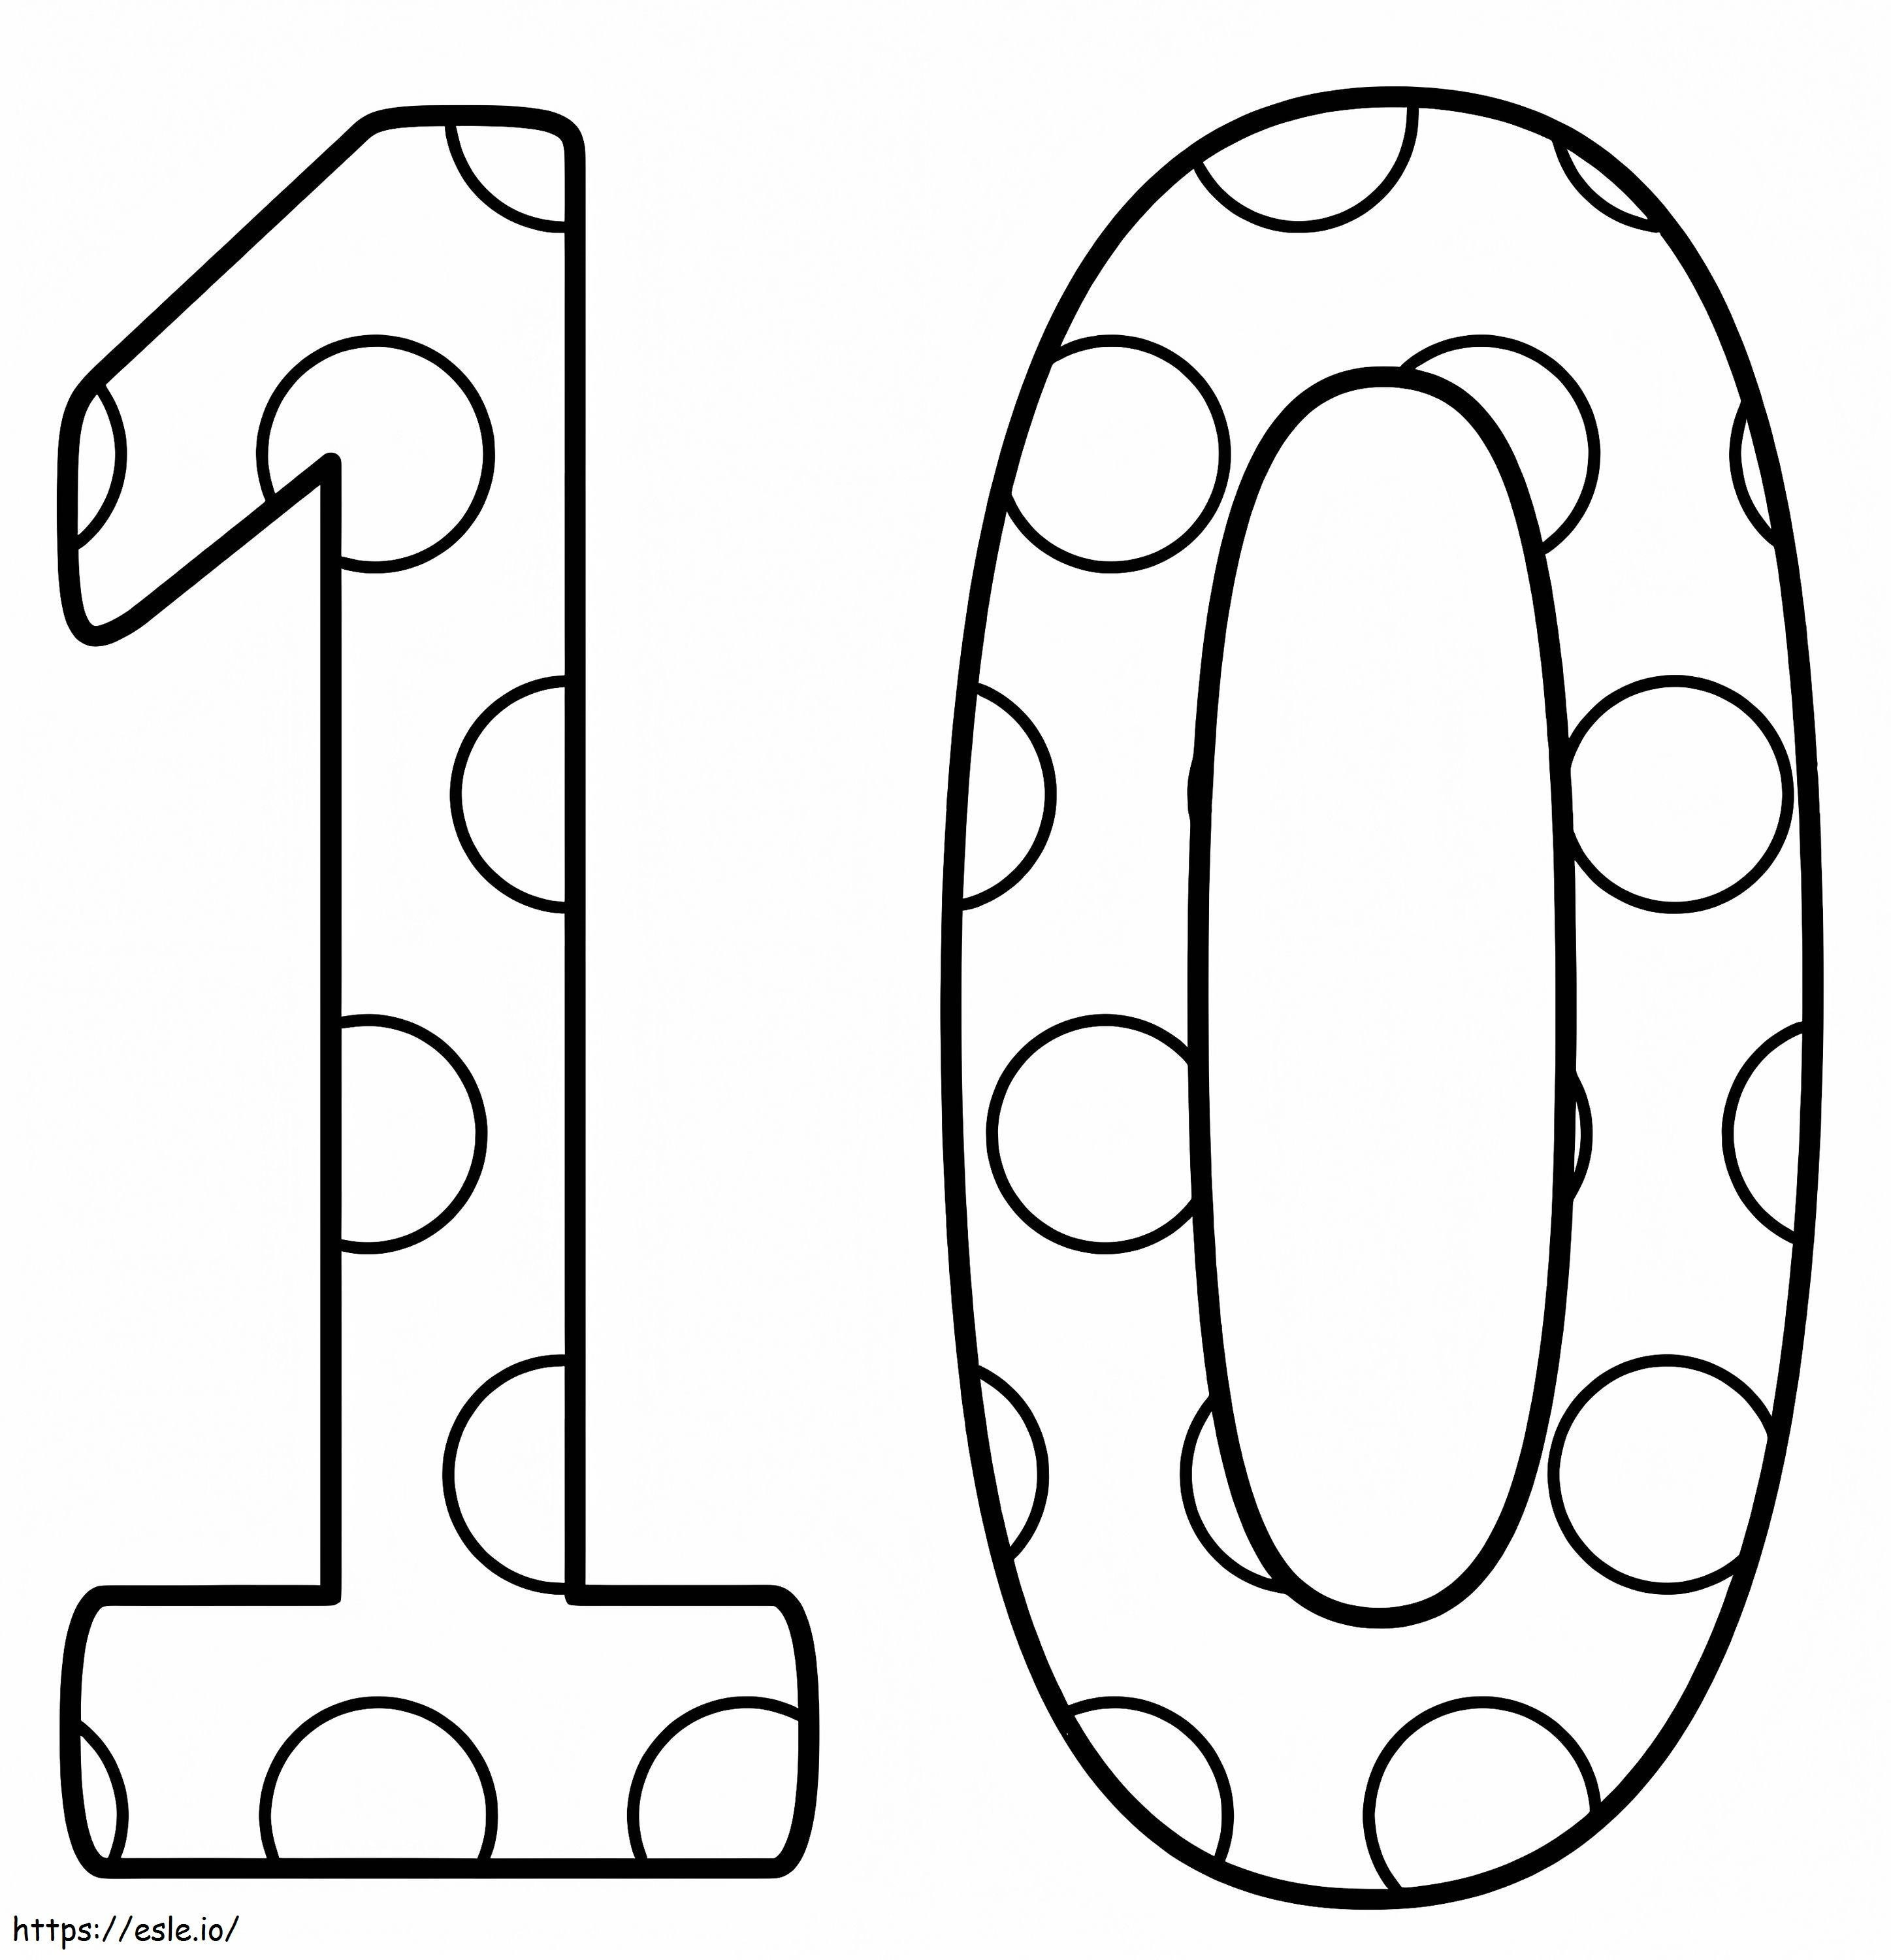 Free Printable Number 10 coloring page